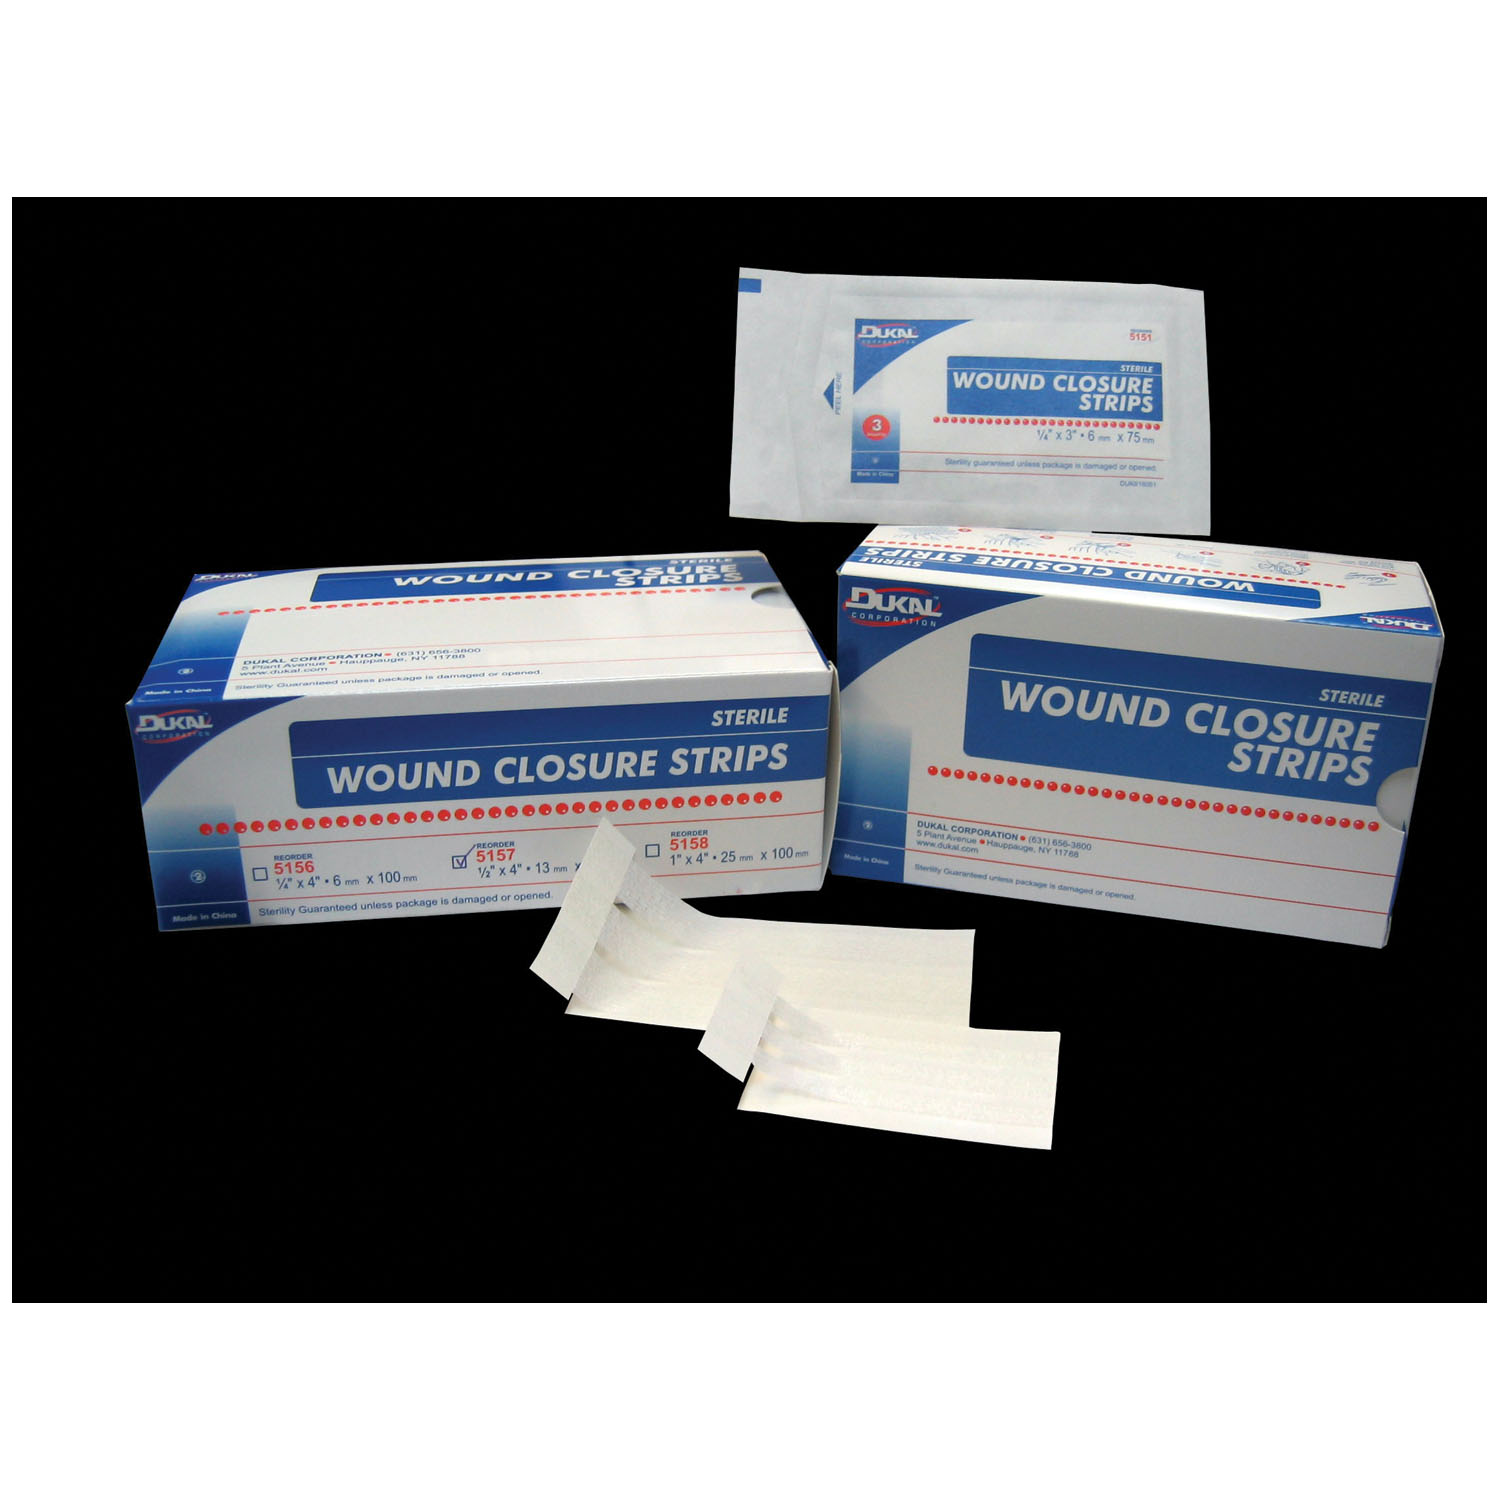 DUKAL WOUND CLOSURE STRIPS : 5152 BX $41.05 Stocked